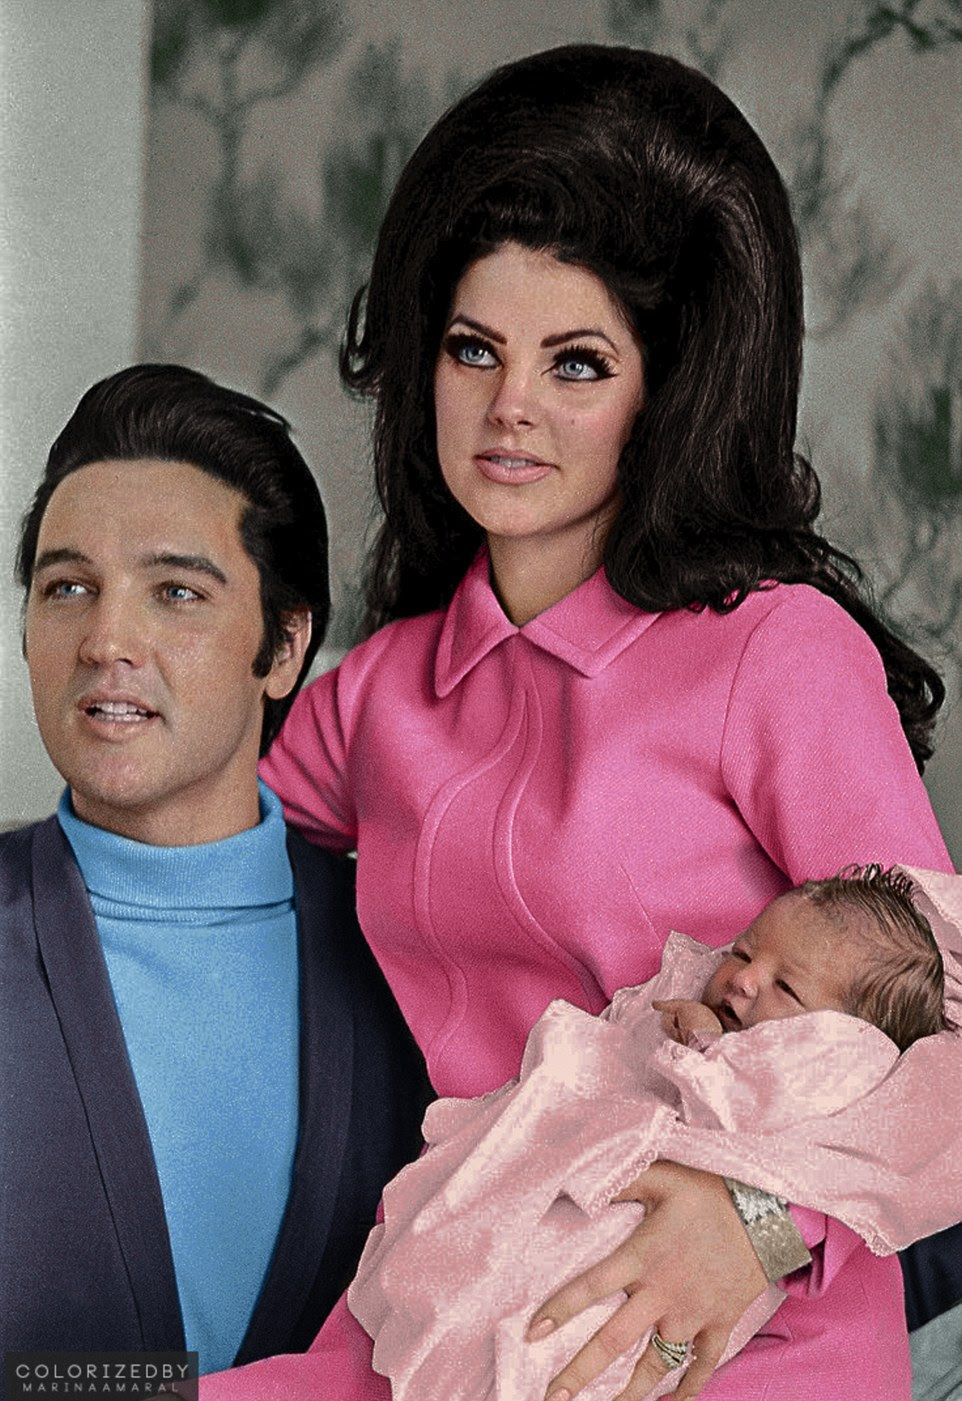 Family photo: Elvis Presley and Priscilla Presley are pictured here with their daughter Lisa Marie. Priscilla and Elvis met in November 1959 when Priscilla was just 14 1/2 years old. Elvis formally proposed to Priscilla in December 1966